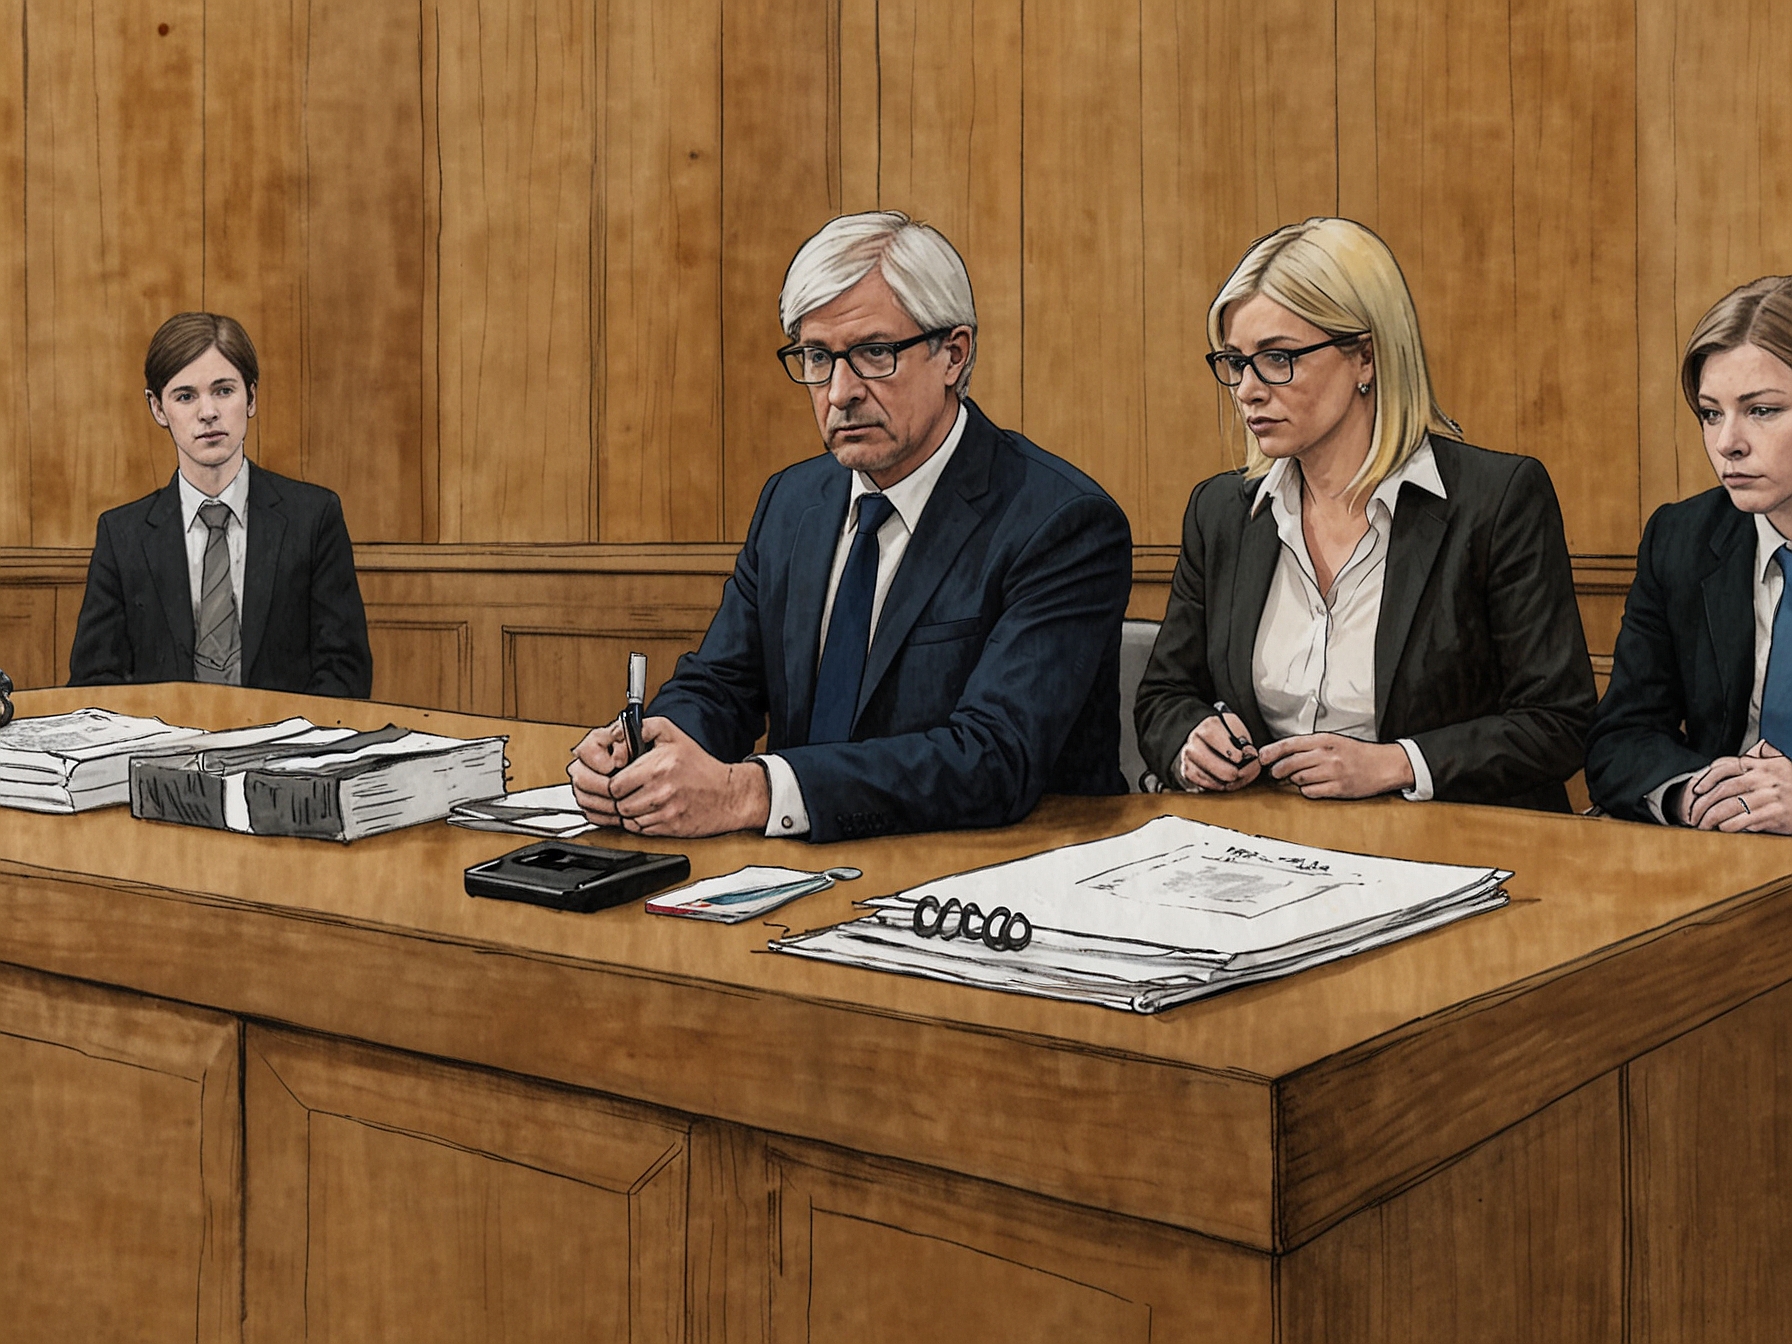 An image of the 'kidnap kit' including handcuffs and gags, shown in court to illustrate the premeditated and malicious nature of the plot against Holly Willoughby.